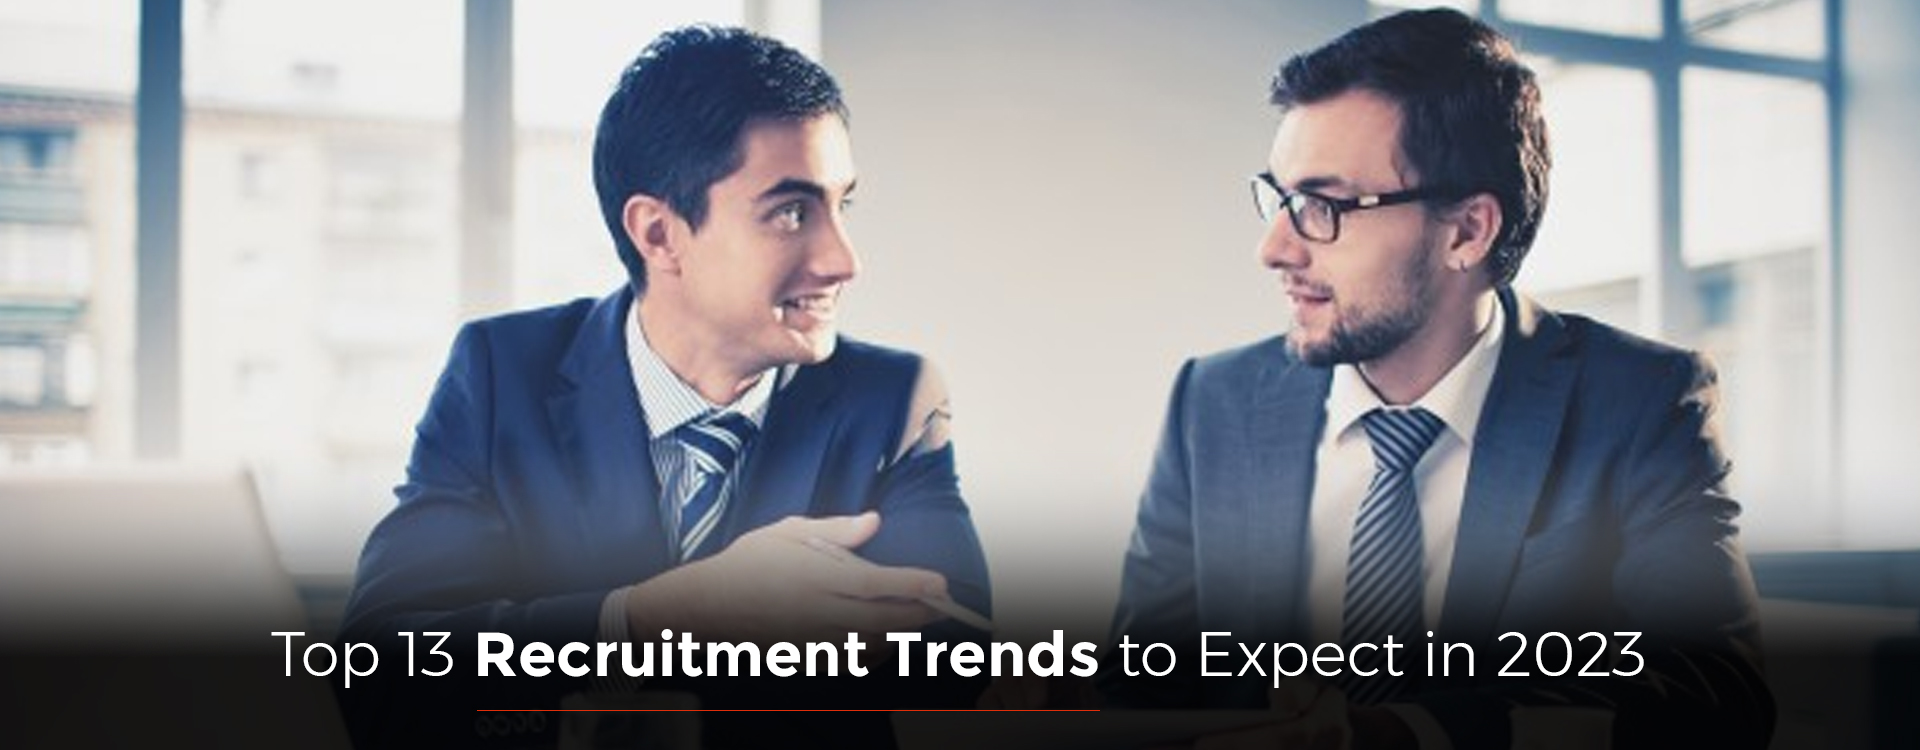 Top 13 Recruitment Trends to Expect in 2023